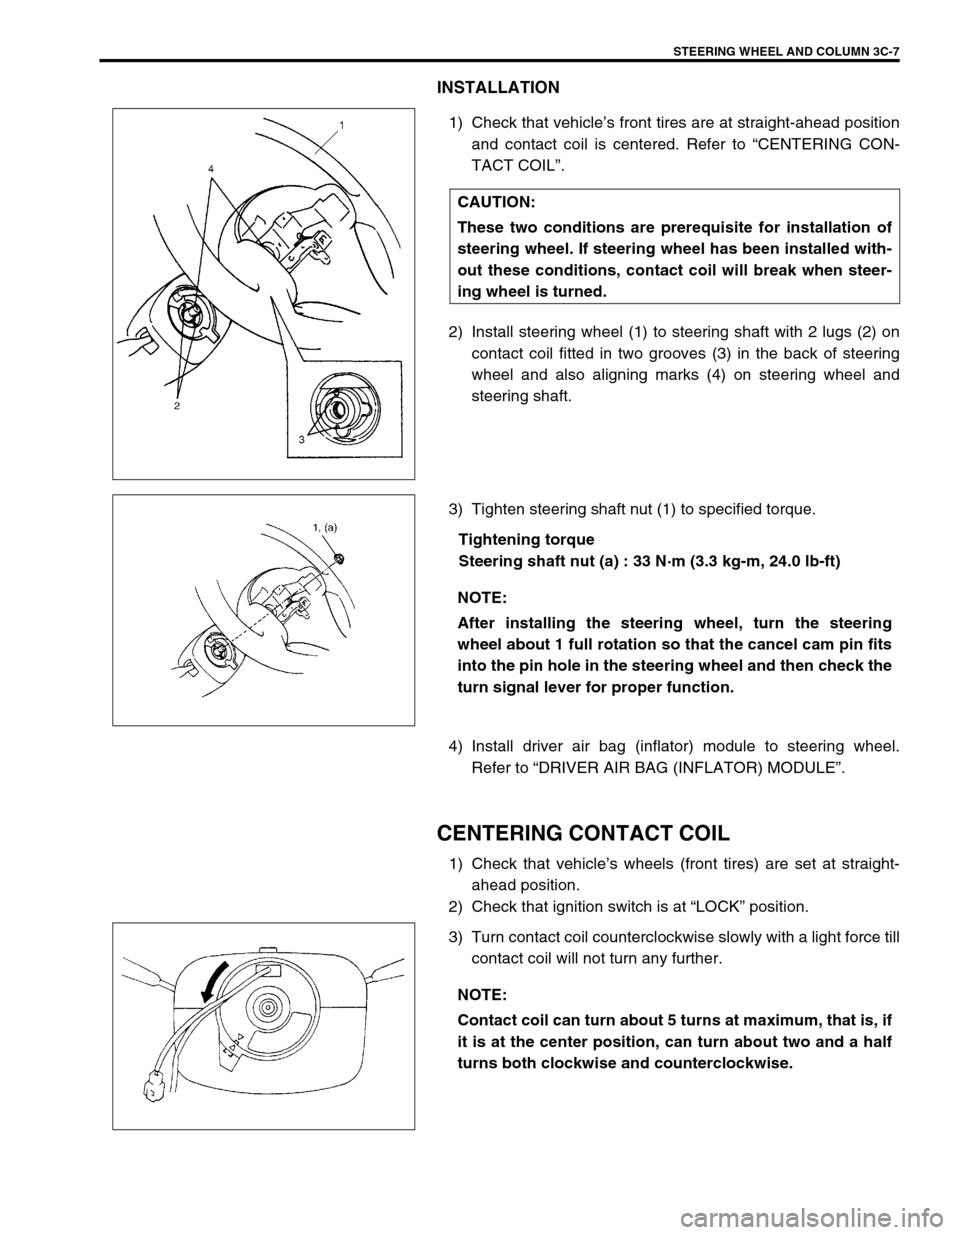 SUZUKI SWIFT 2000 1.G RG413 Service Workshop Manual STEERING WHEEL AND COLUMN 3C-7
INSTALLATION
1) Check that vehicle’s front tires are at straight-ahead position
and contact coil is centered. Refer to “CENTERING CON-
TACT COIL”.
2) Install steer